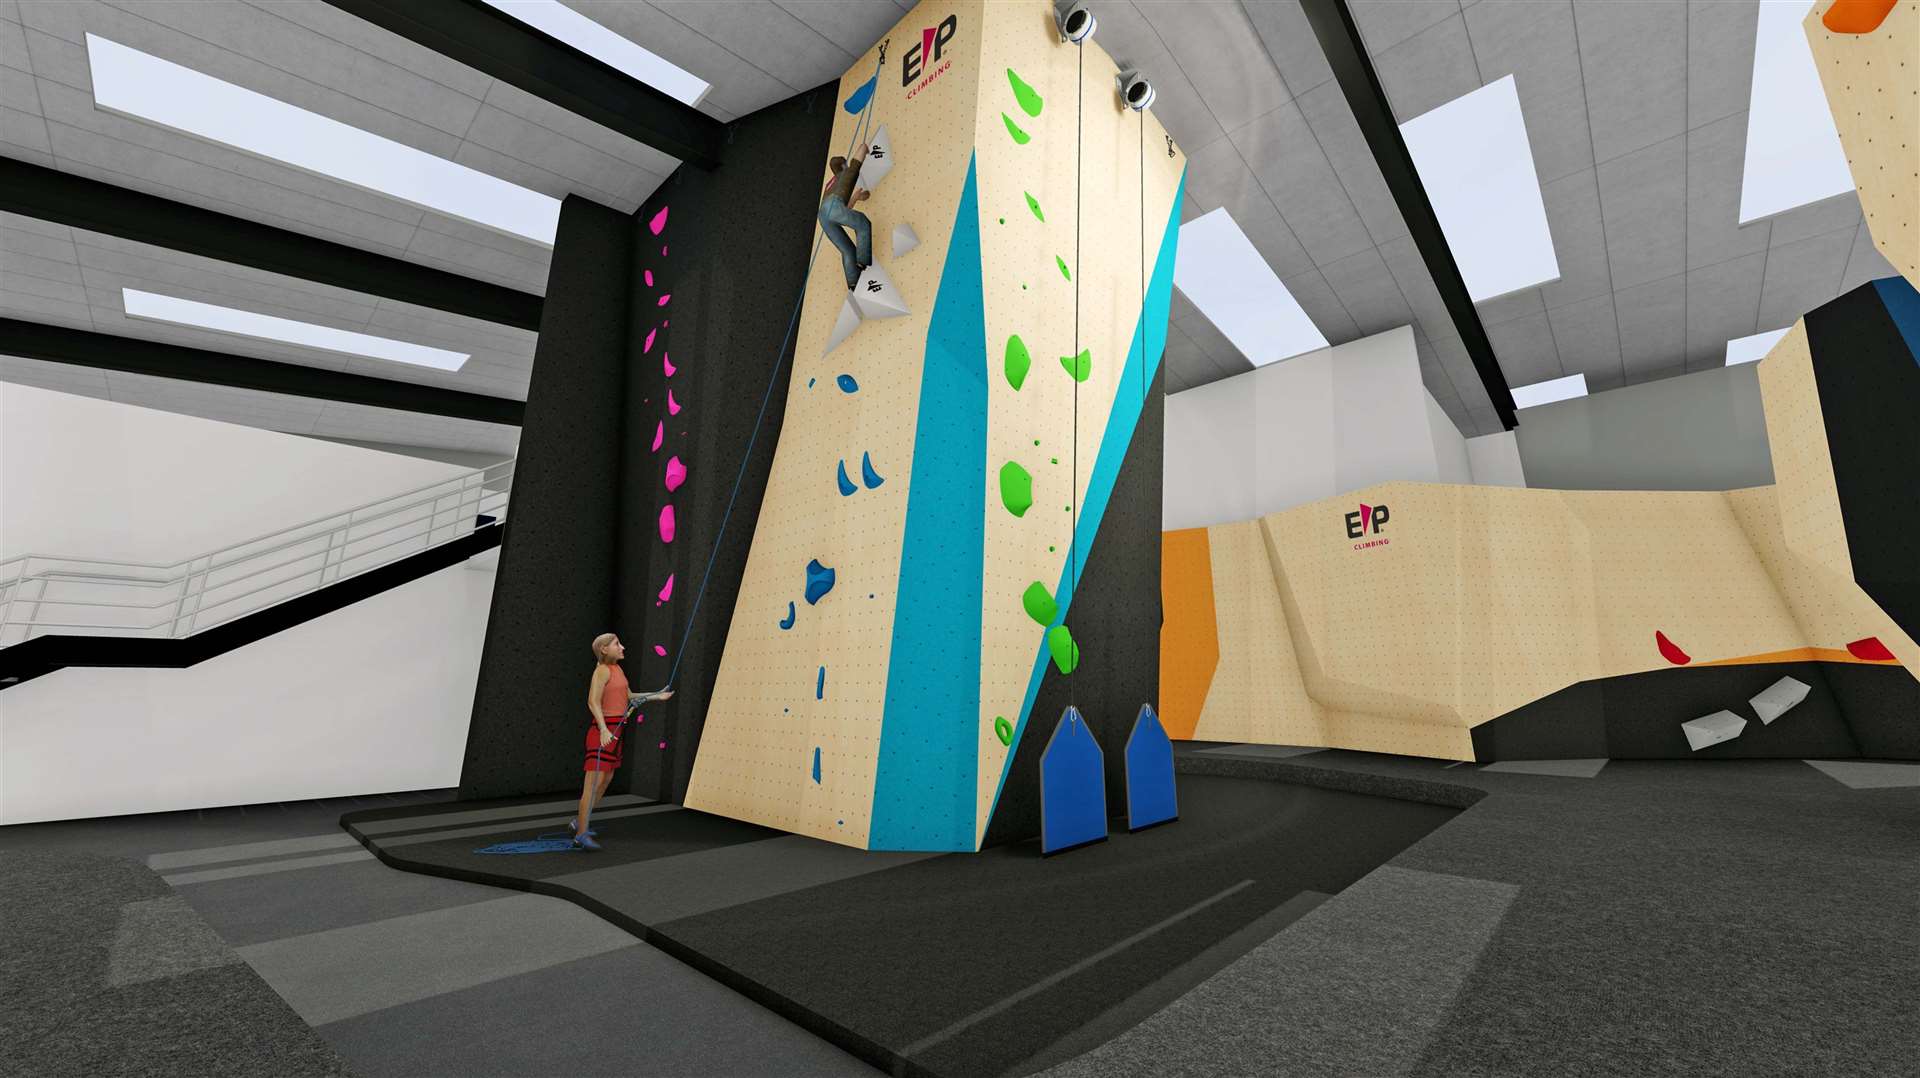 An impression of The Ledge climbing gym in Inverness.